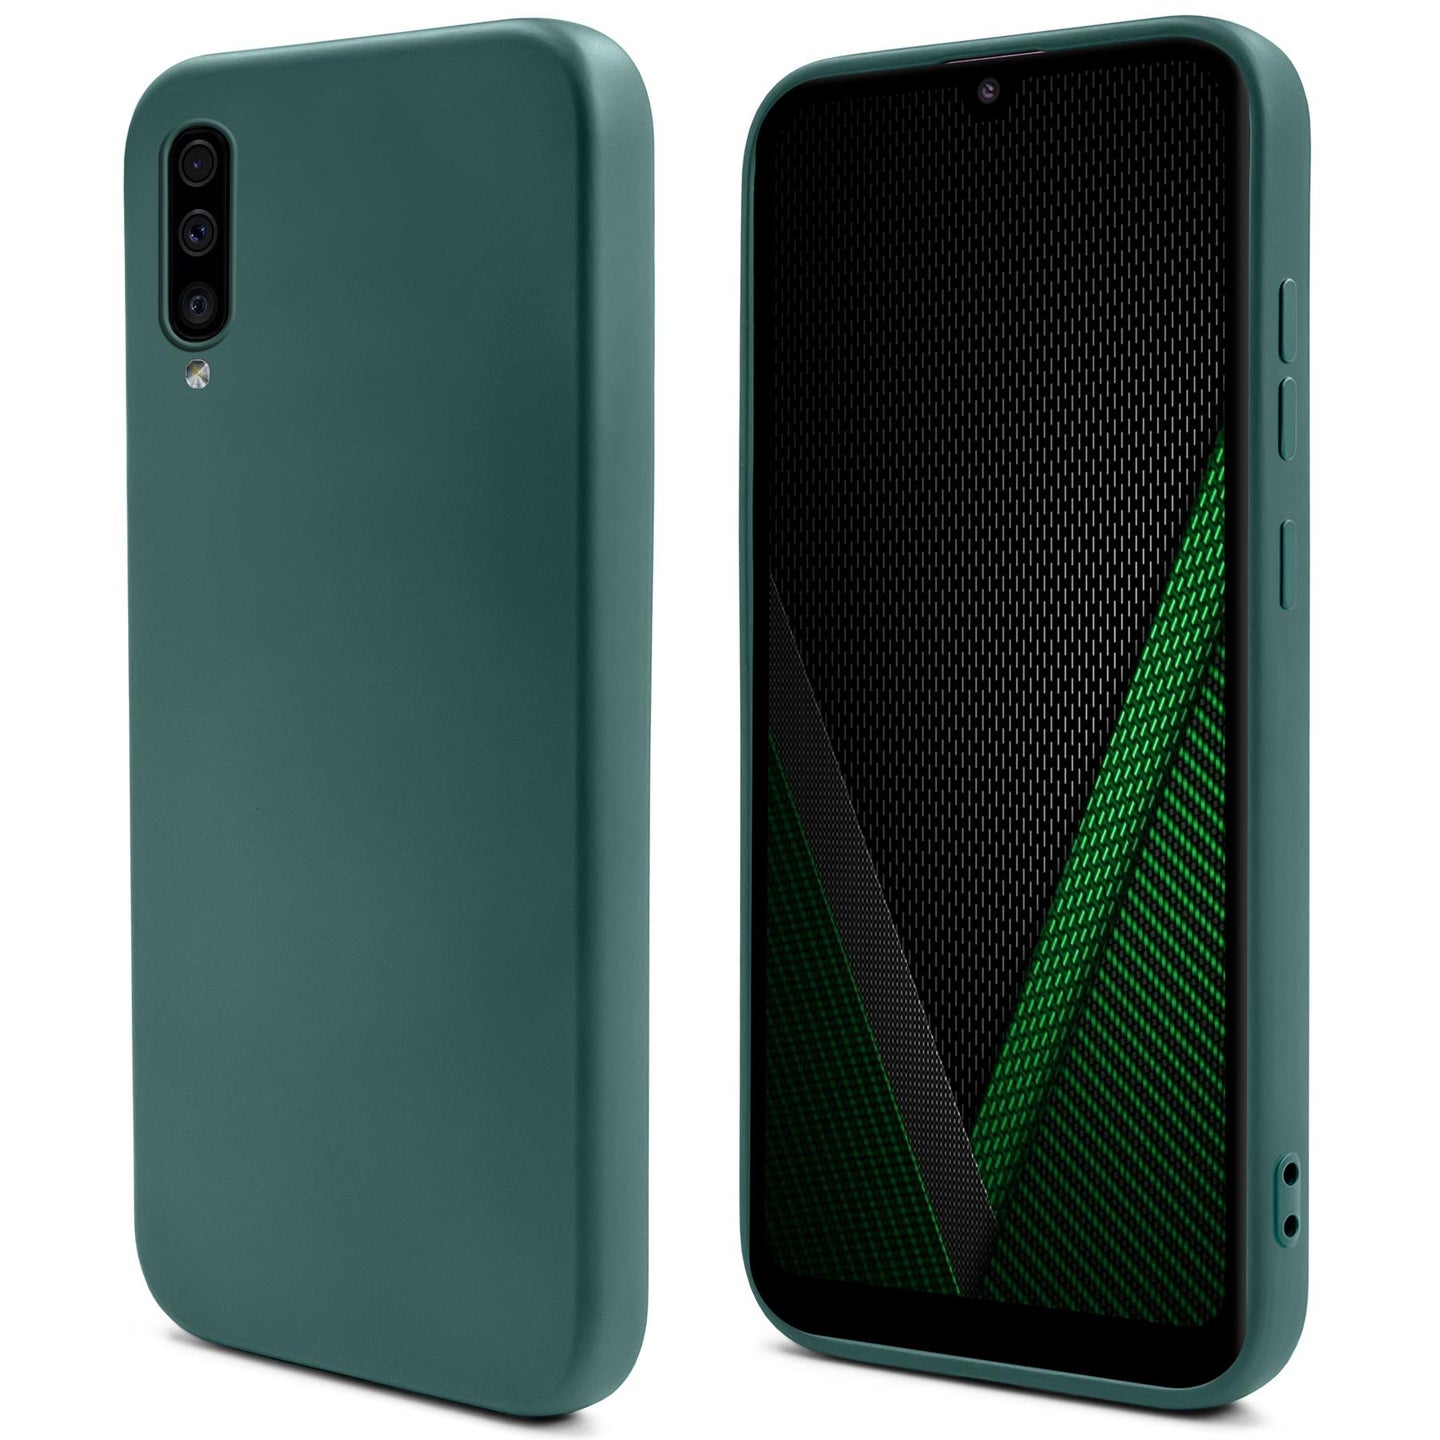 Moozy Lifestyle. Silicone Case for Samsung A50, Dark Green - Liquid Silicone Lightweight Cover with Matte Finish and Soft Microfiber Lining, Premium Silicone Case